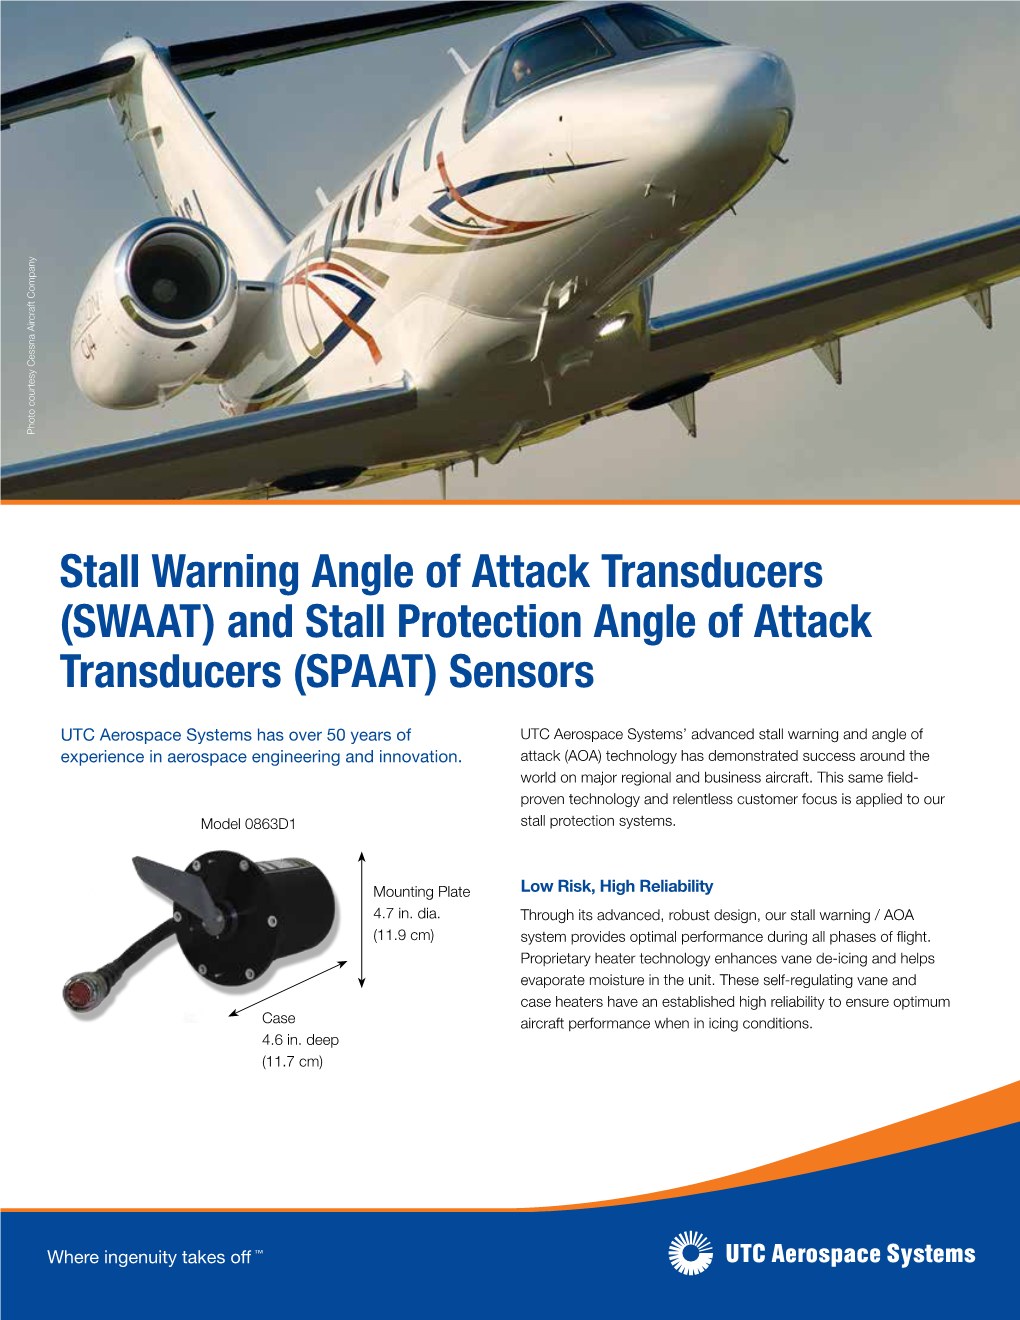 (SWAAT) and Stall Protection Angle of Attack Transducers (SPAAT) Sensors